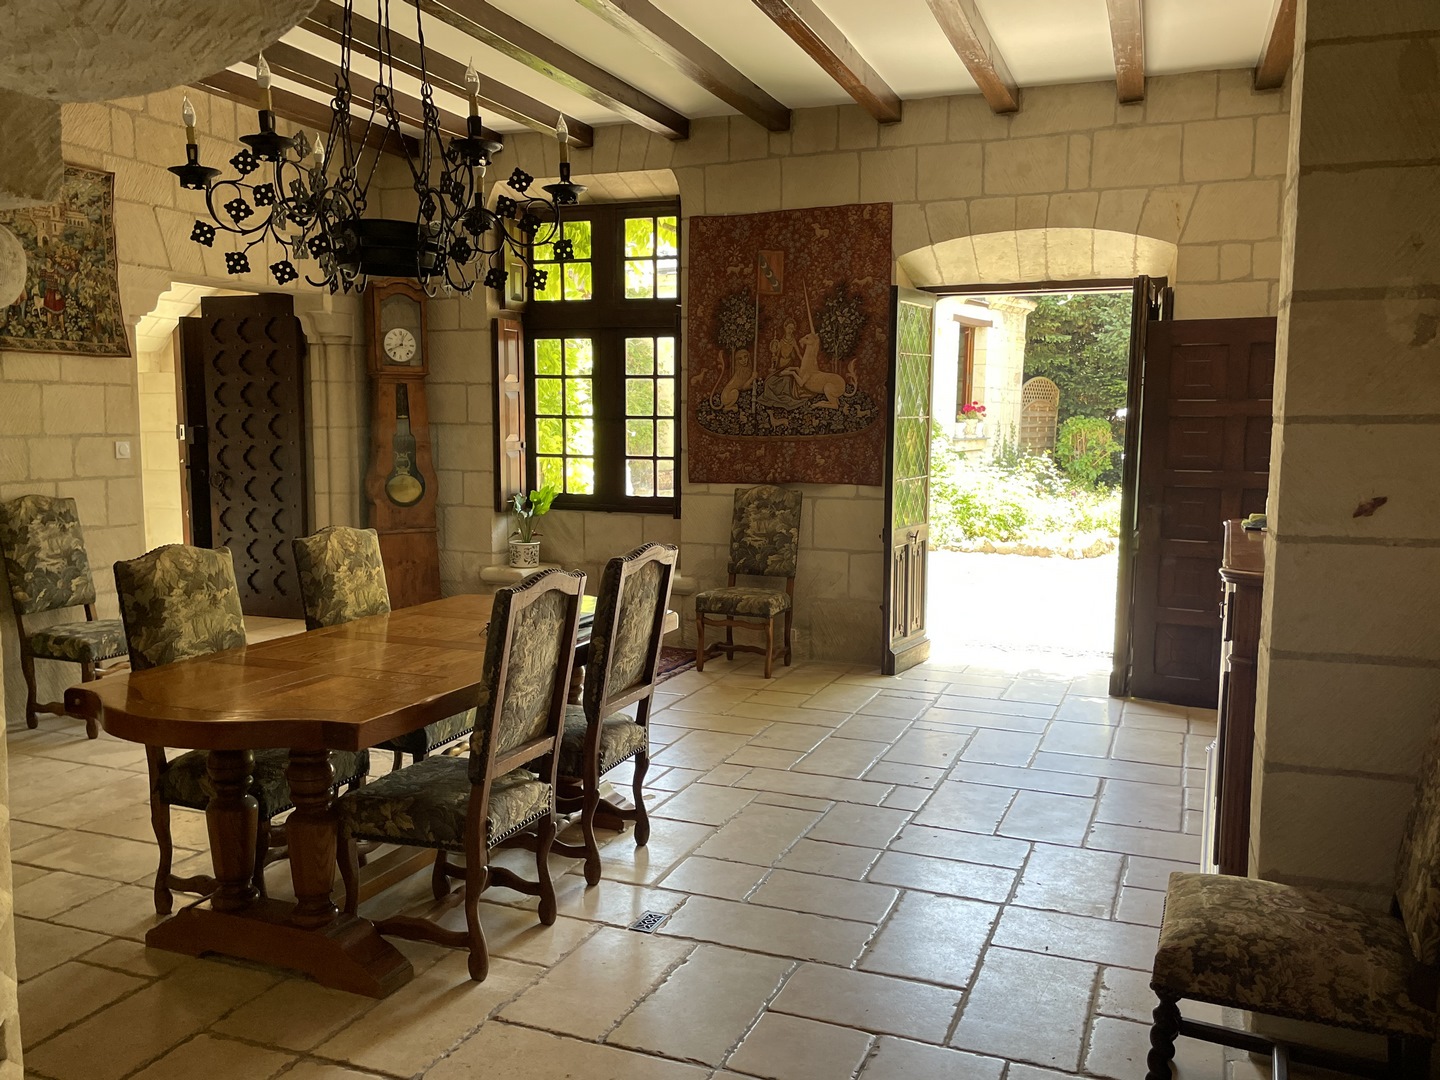 Magnificent 14th century Manor House of 494m² – Park of 7400m² – Outbuildings – Arched cellars